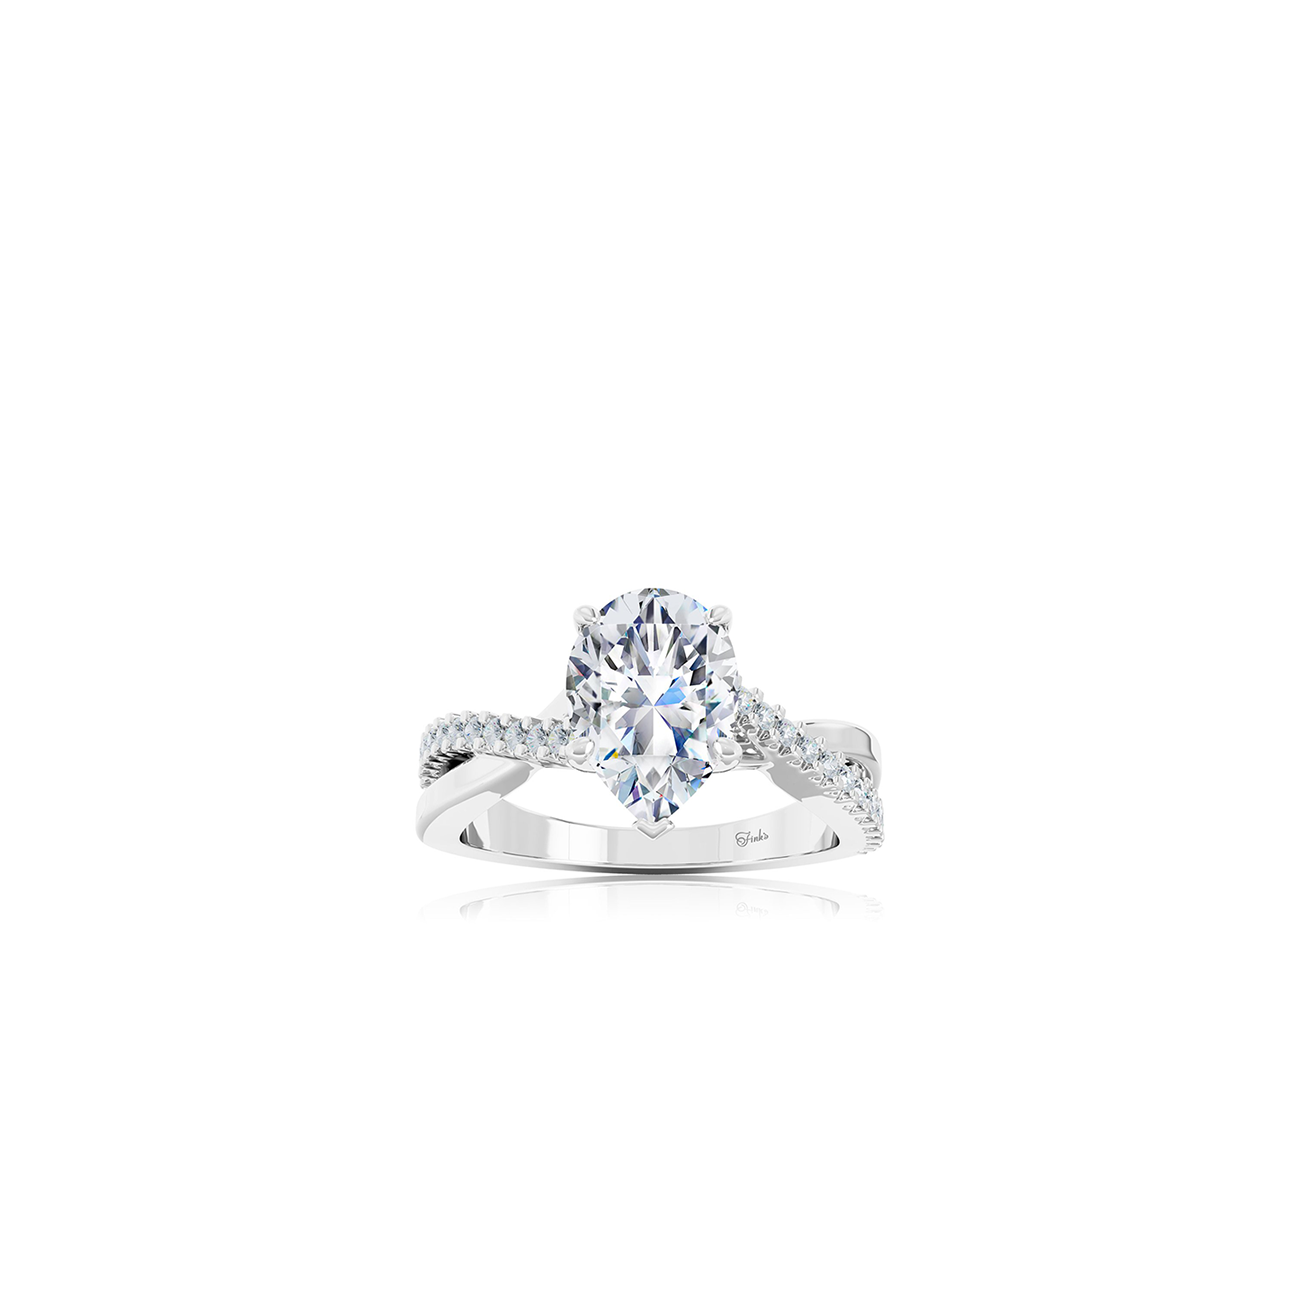 The Studio Collection Pear Shape Center Diamond Crossover Engagement Ring